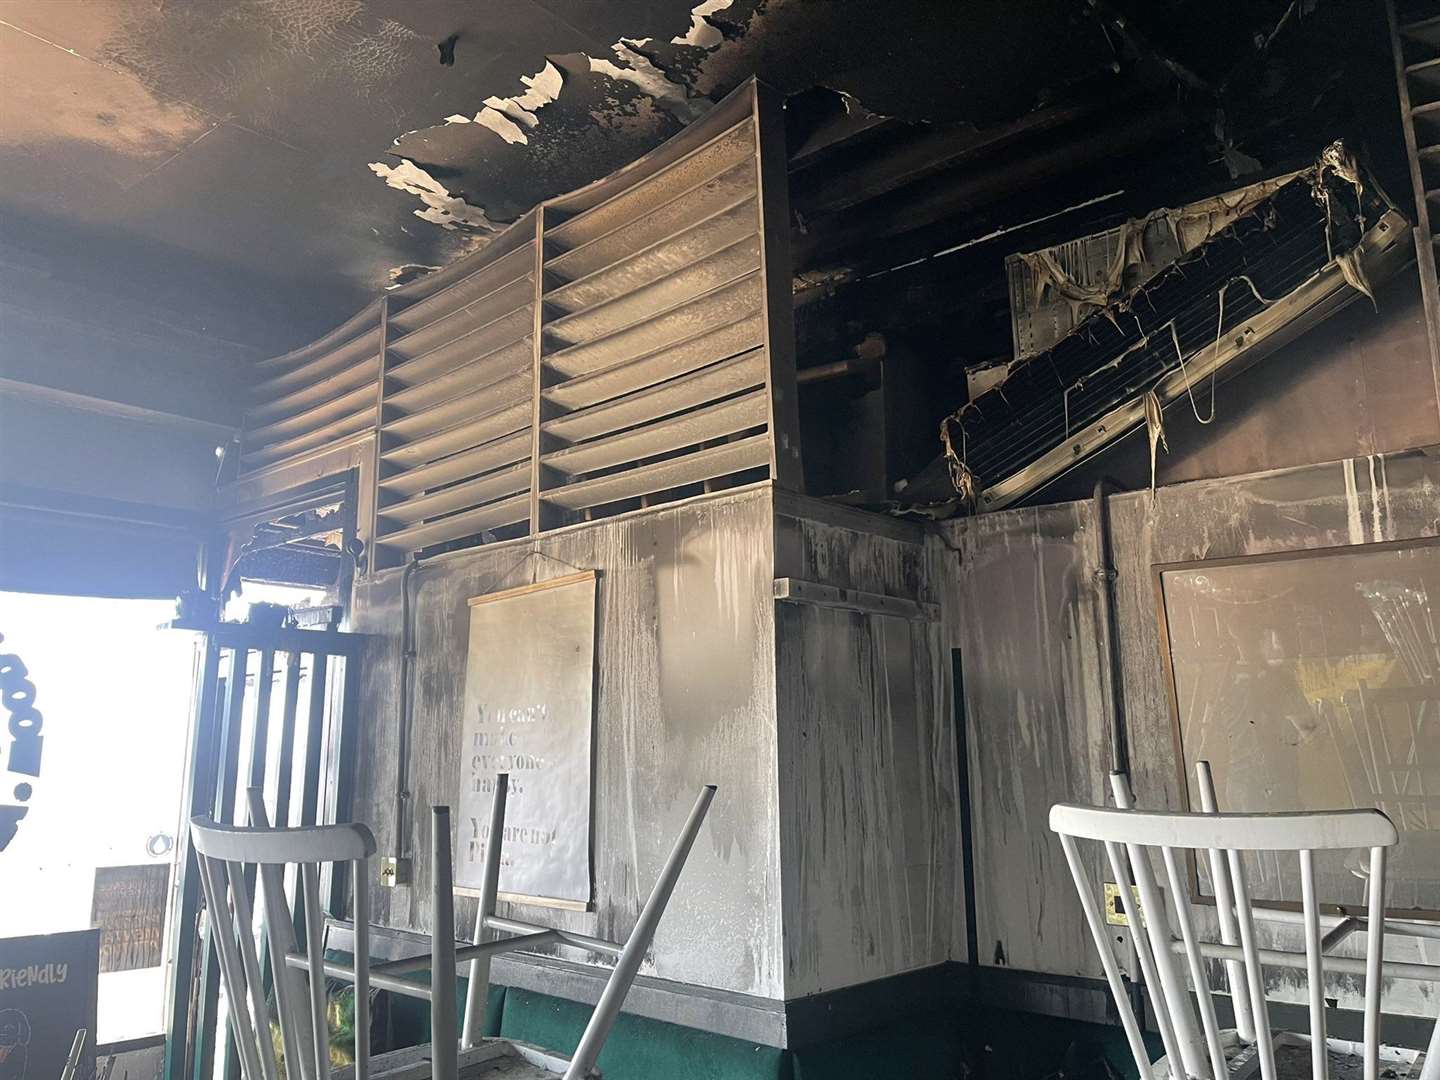 The restaurant in Marine Drive, Margate suffered significant damage. Picture: GB Pizza Co